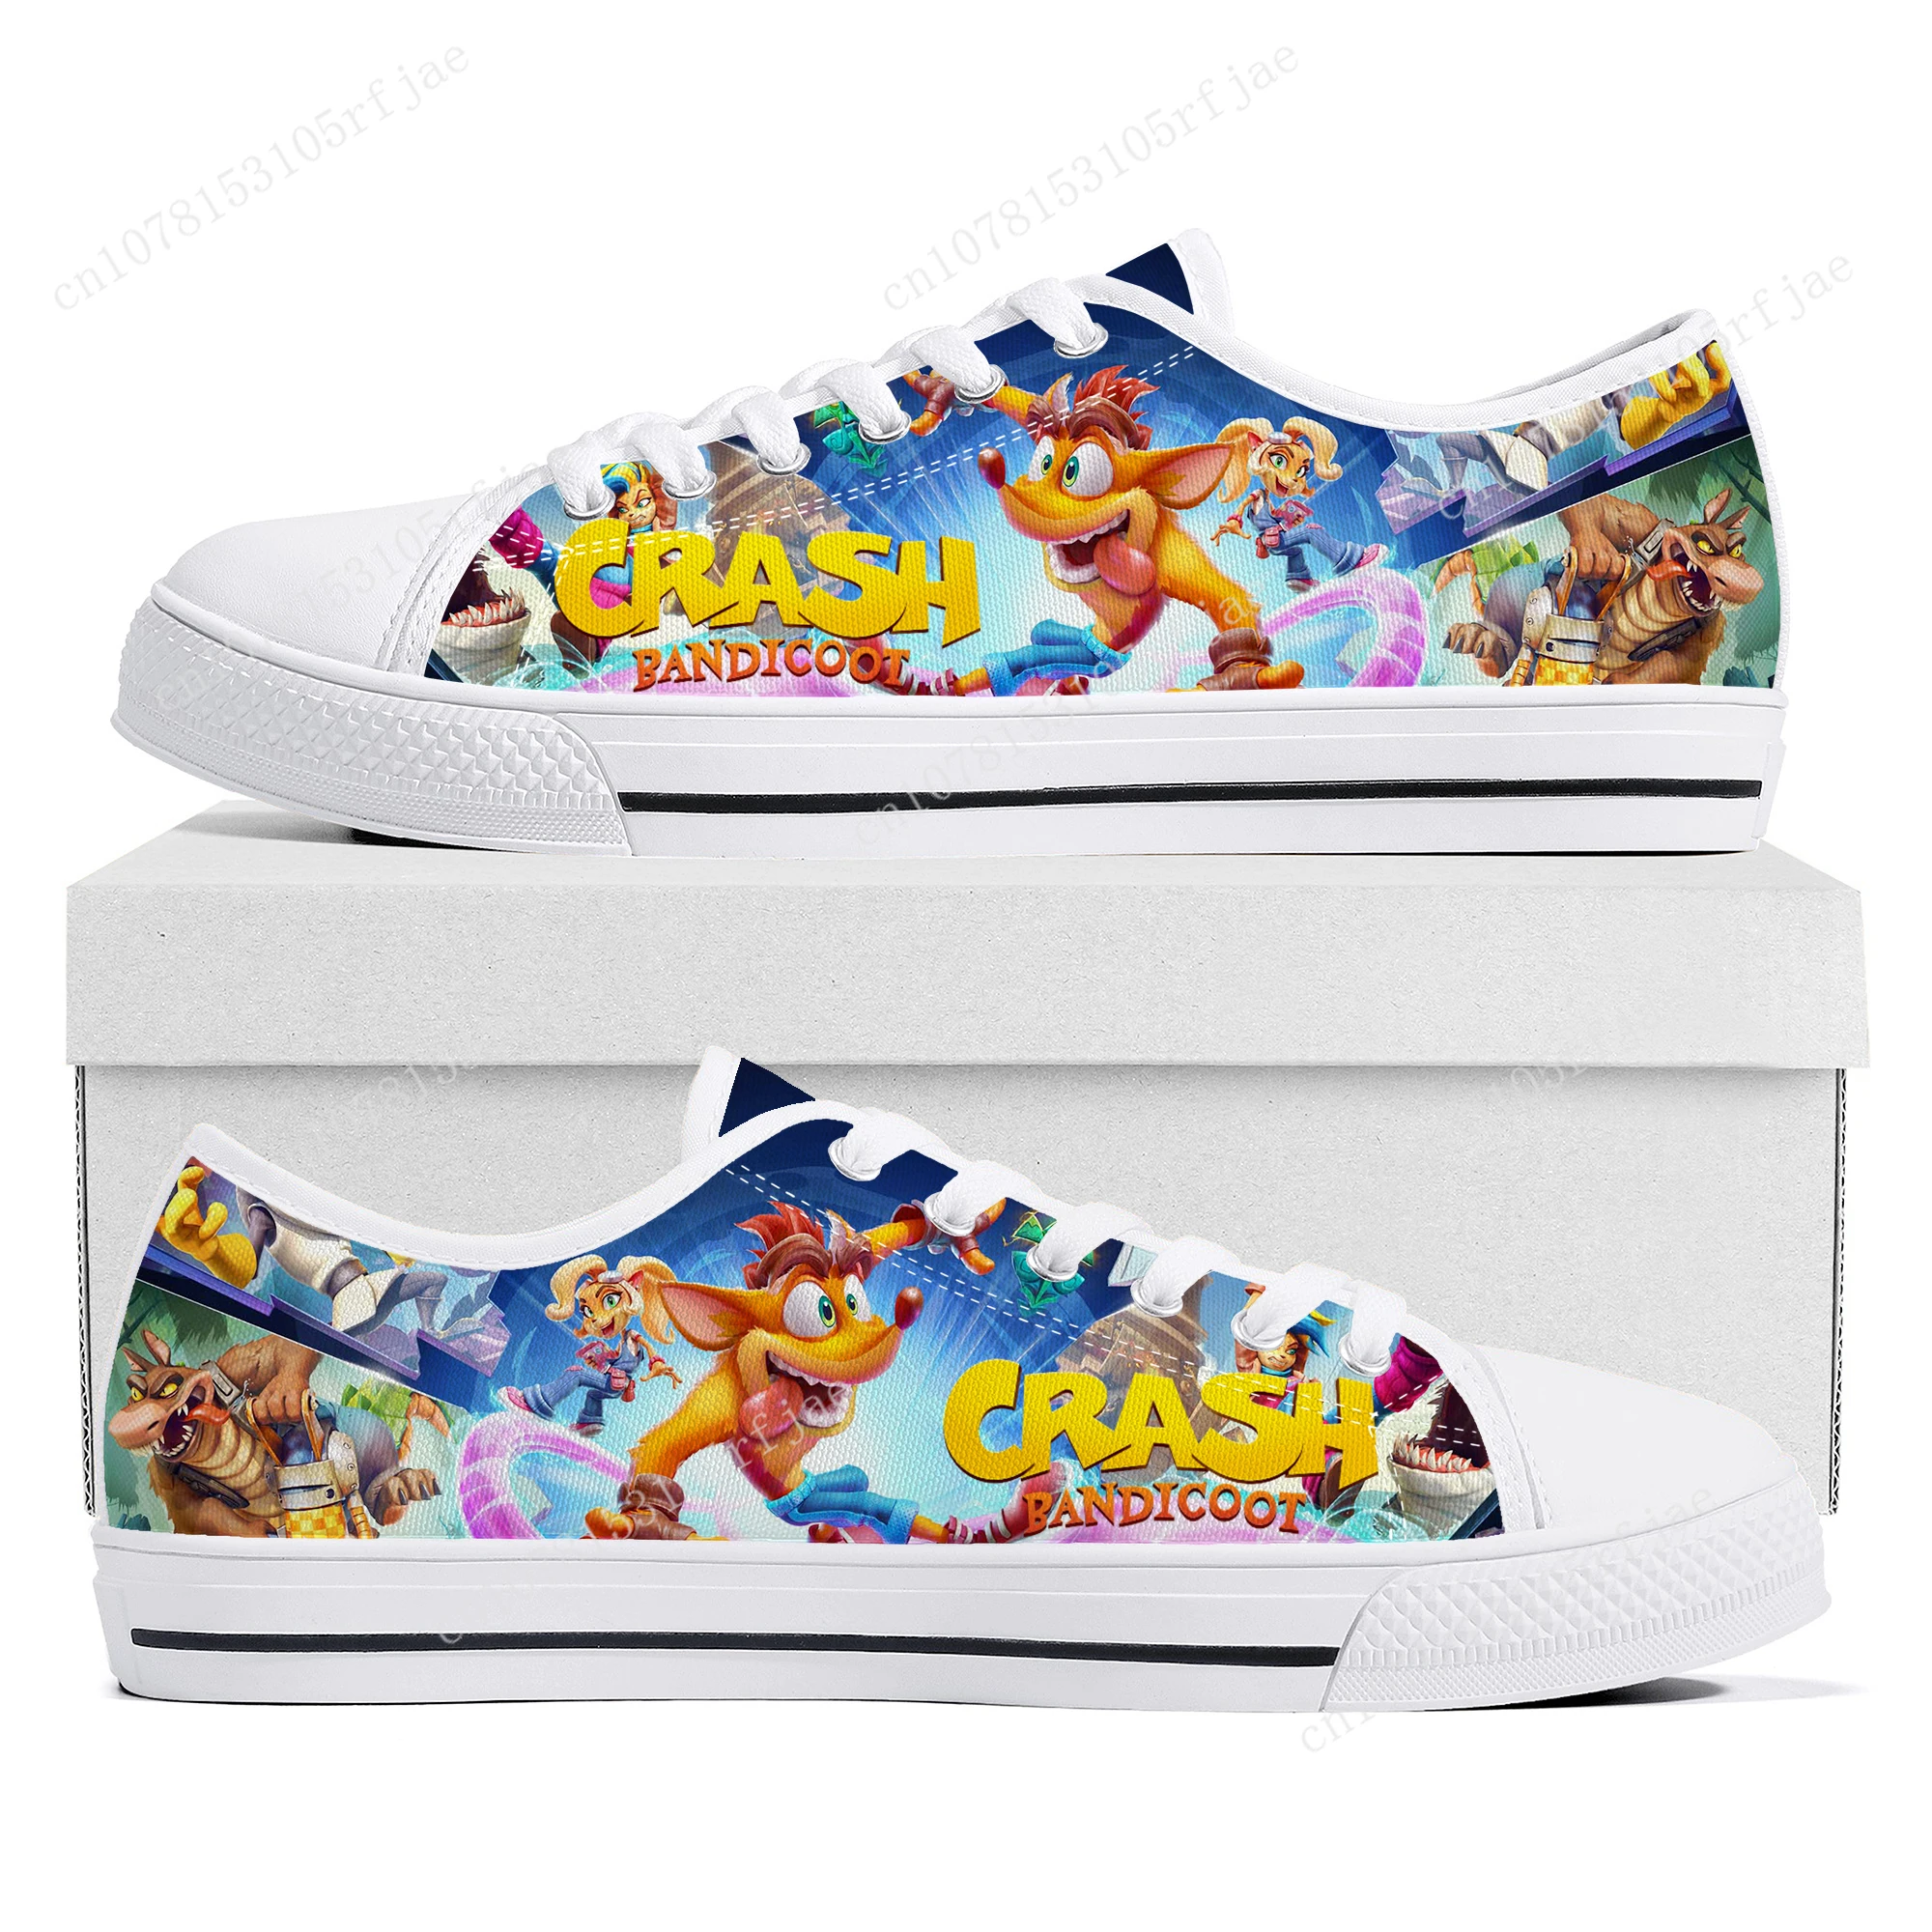 

Crash Bandicoot Low Top Sneakers Cartoon Game Womens Mens Teenager High Quality Canvas Sneaker Couple Fashion Custom Built Shoes